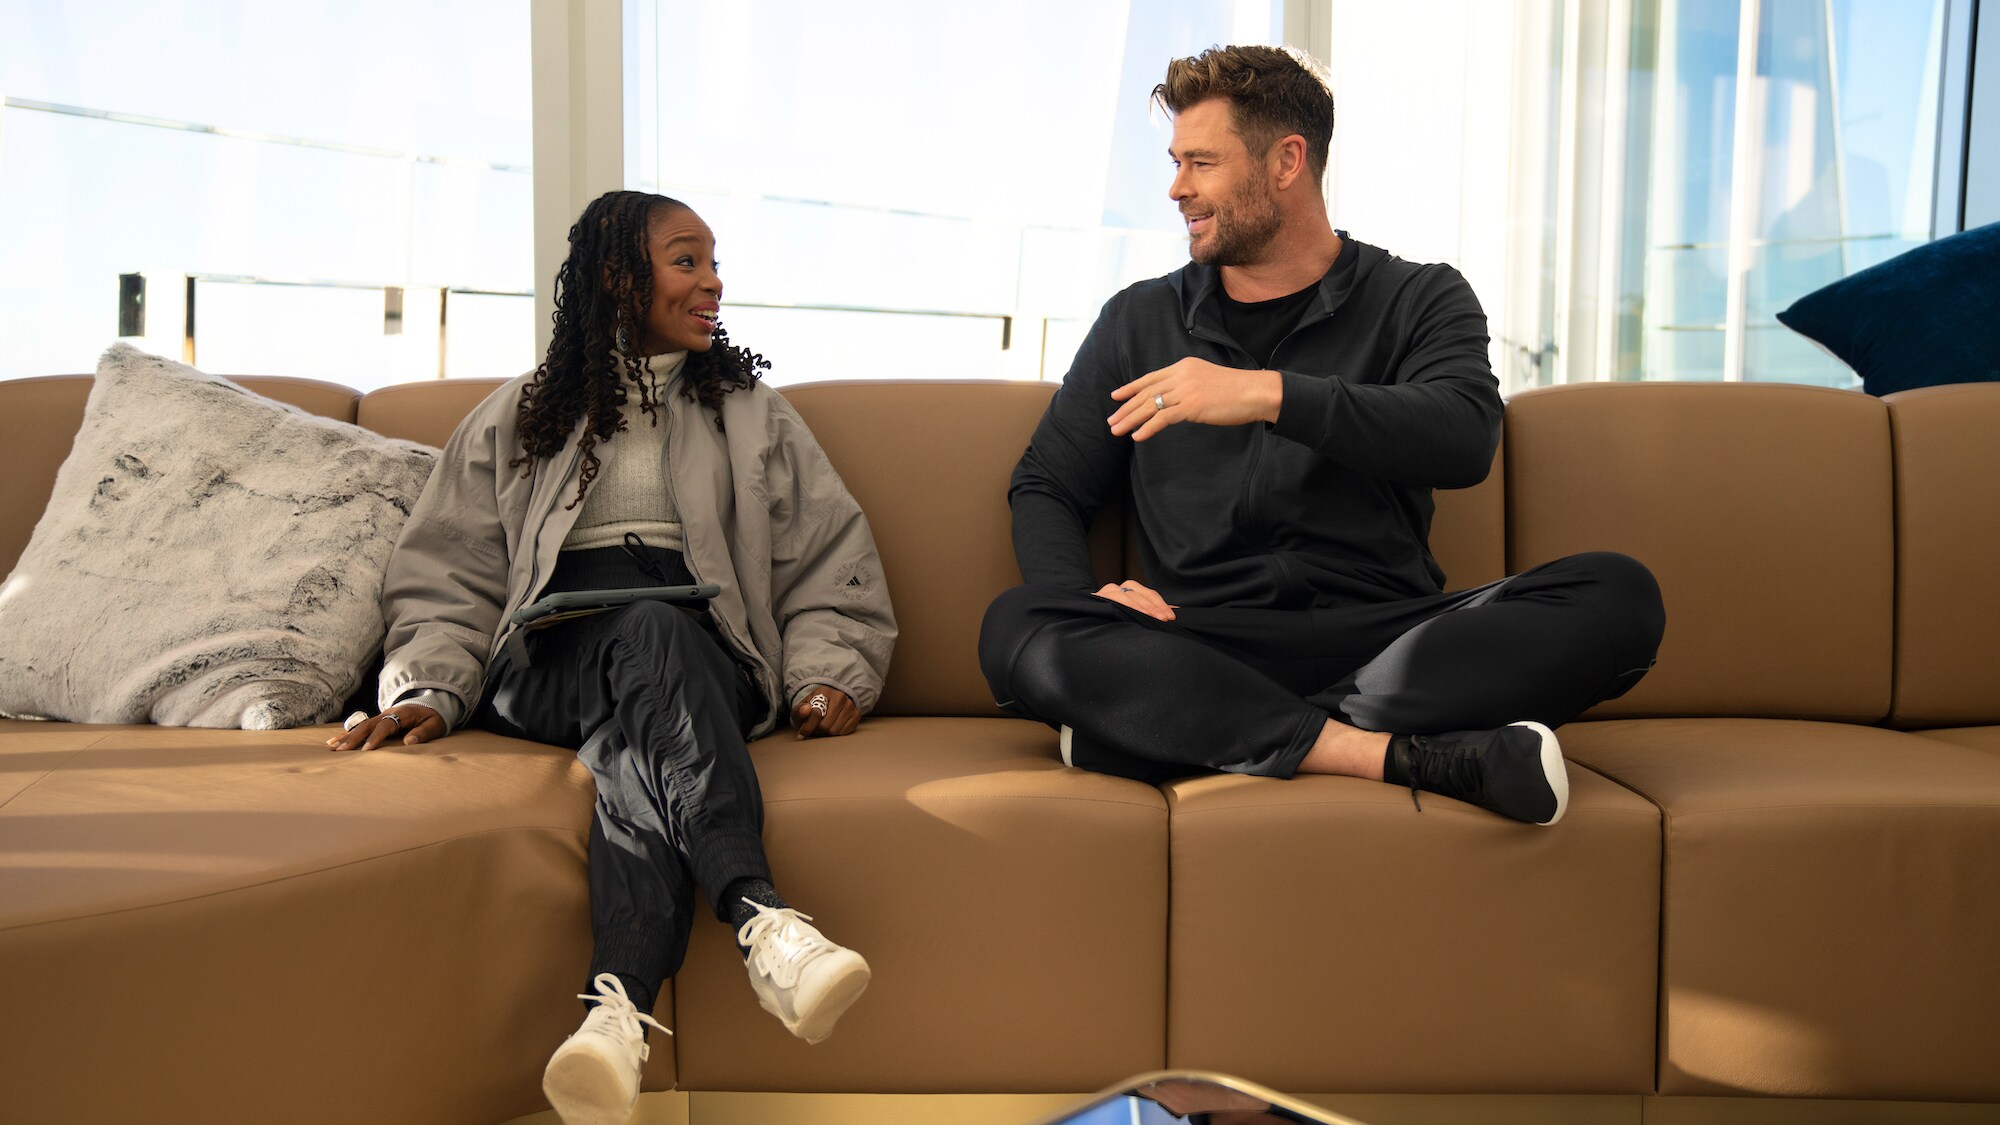 Dr. Modupe Akinola and Chris Hemsworth talk on the couch before Chris attempts an epic crane walk.(National Geographic for Disney+/Craig Parry)